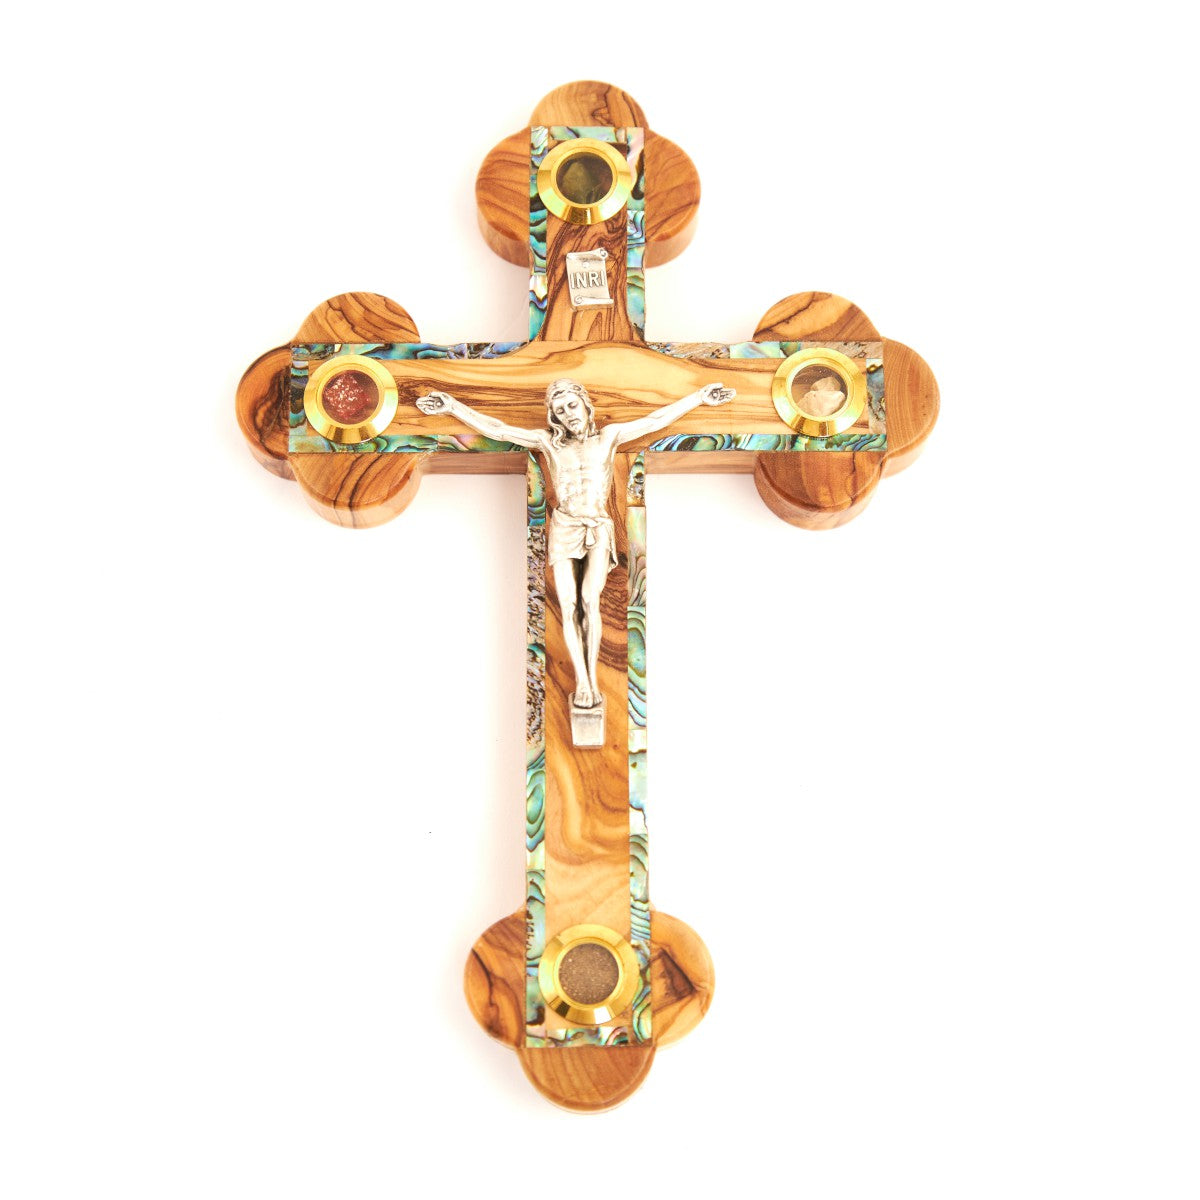 8.7" Crucifix, Wooden Cross with Mother of Pearl, 4 Souvenirs and 14 Stations of Cross on Back